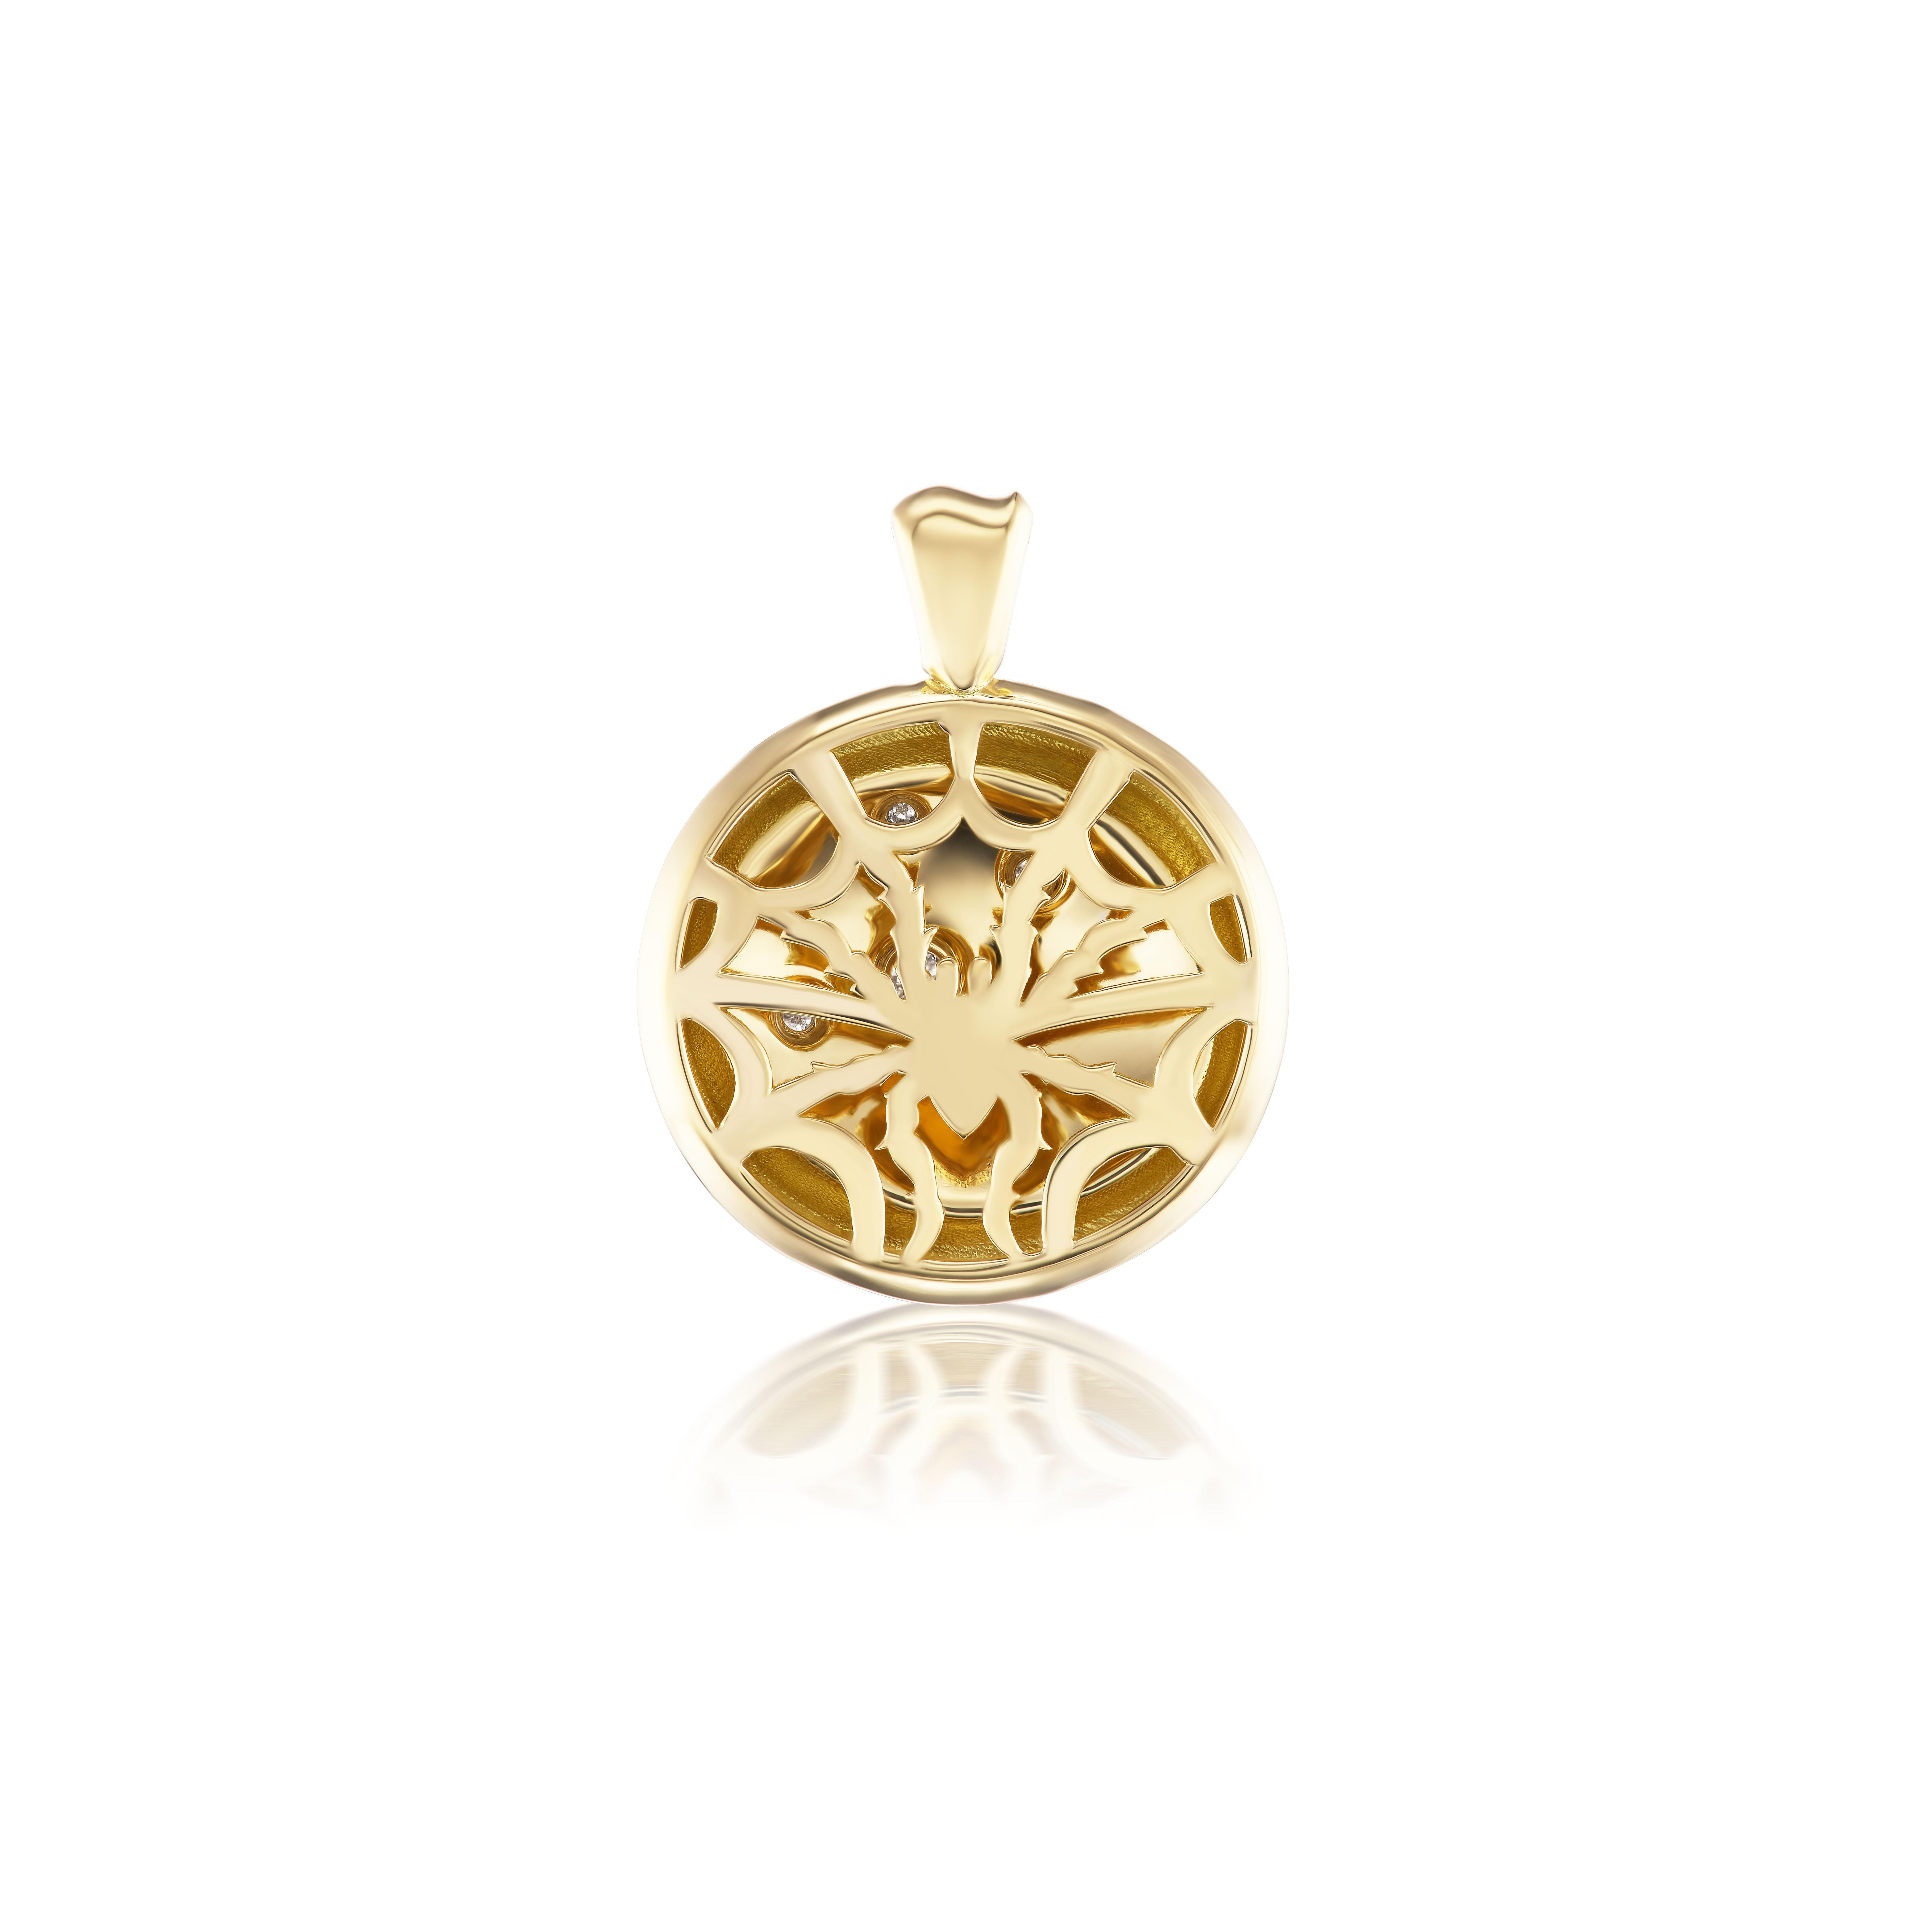 Contemporary AnaKatarina Yellow Gold and Diamond 'Creativity' Signet Pendant Necklace For Sale